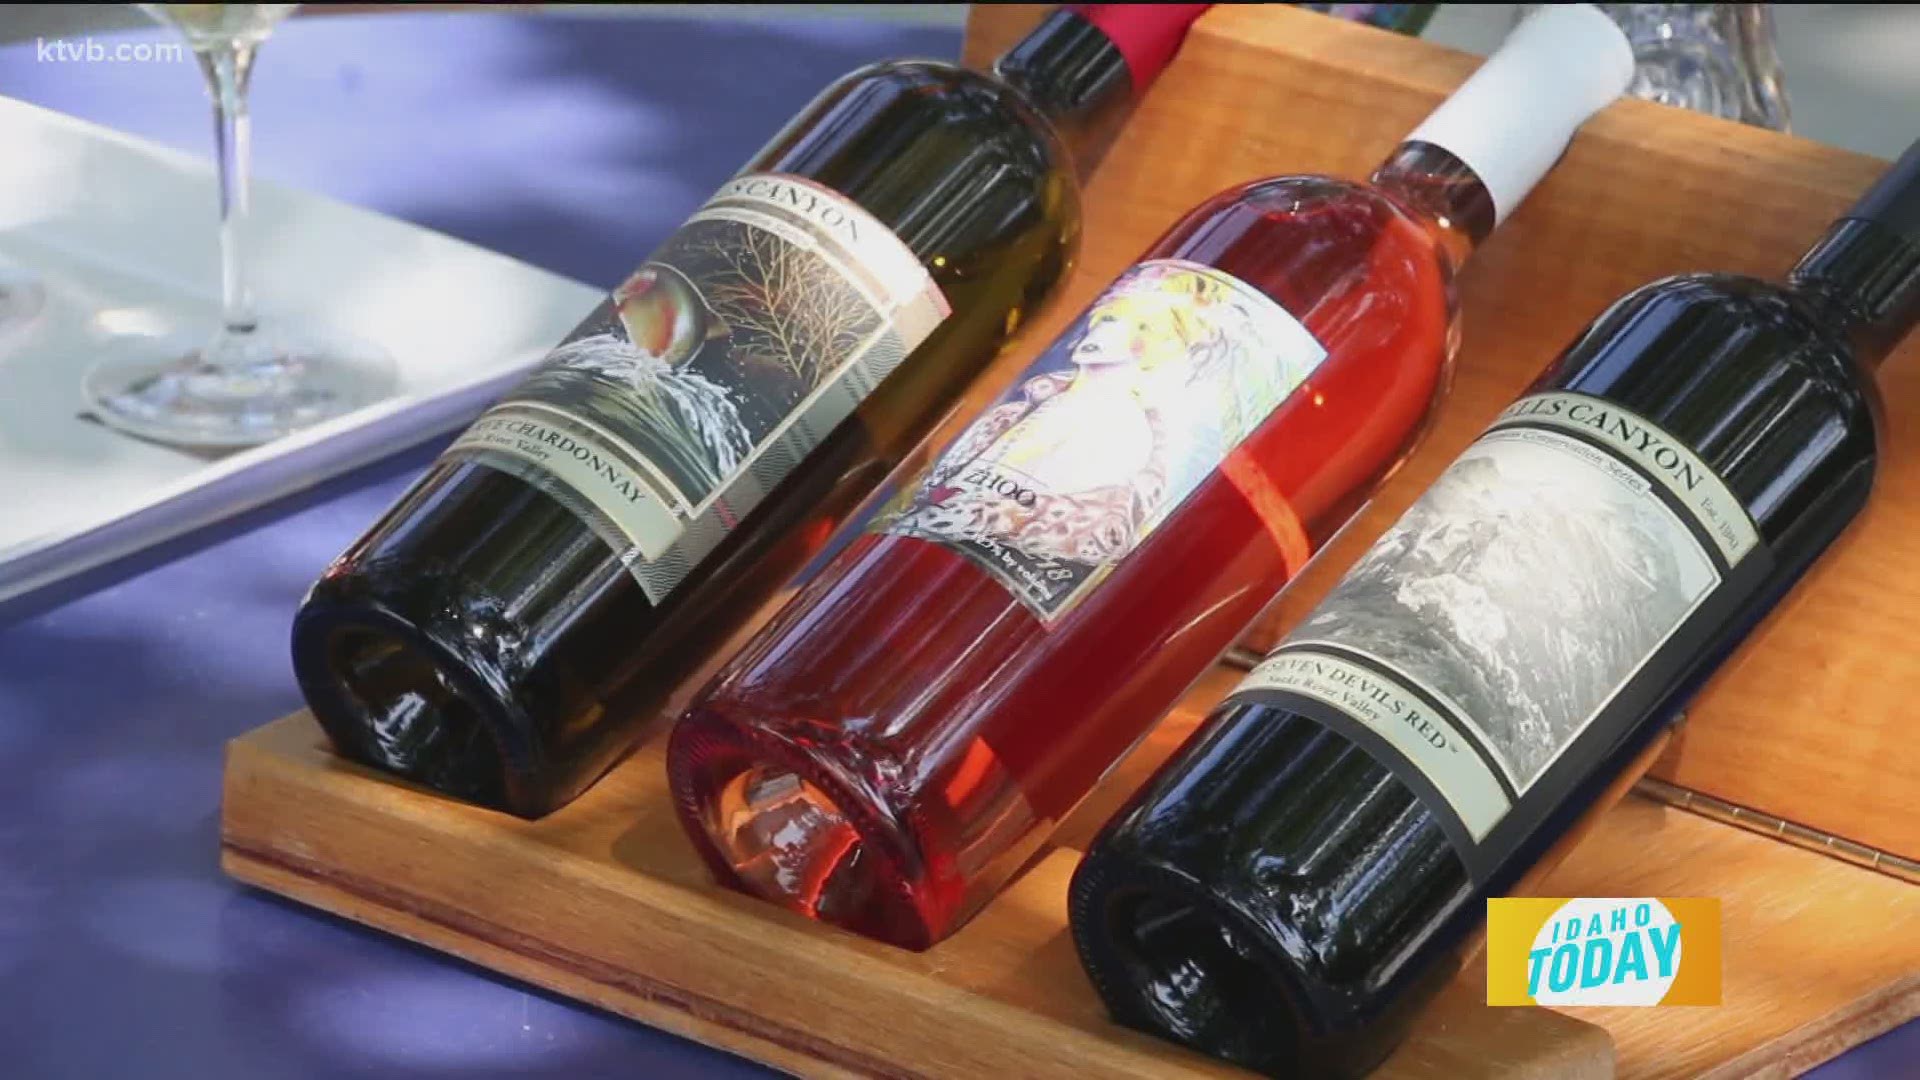 Hadley with Hells Canyon Winery walks us through the do's and don'ts of wine tasting.